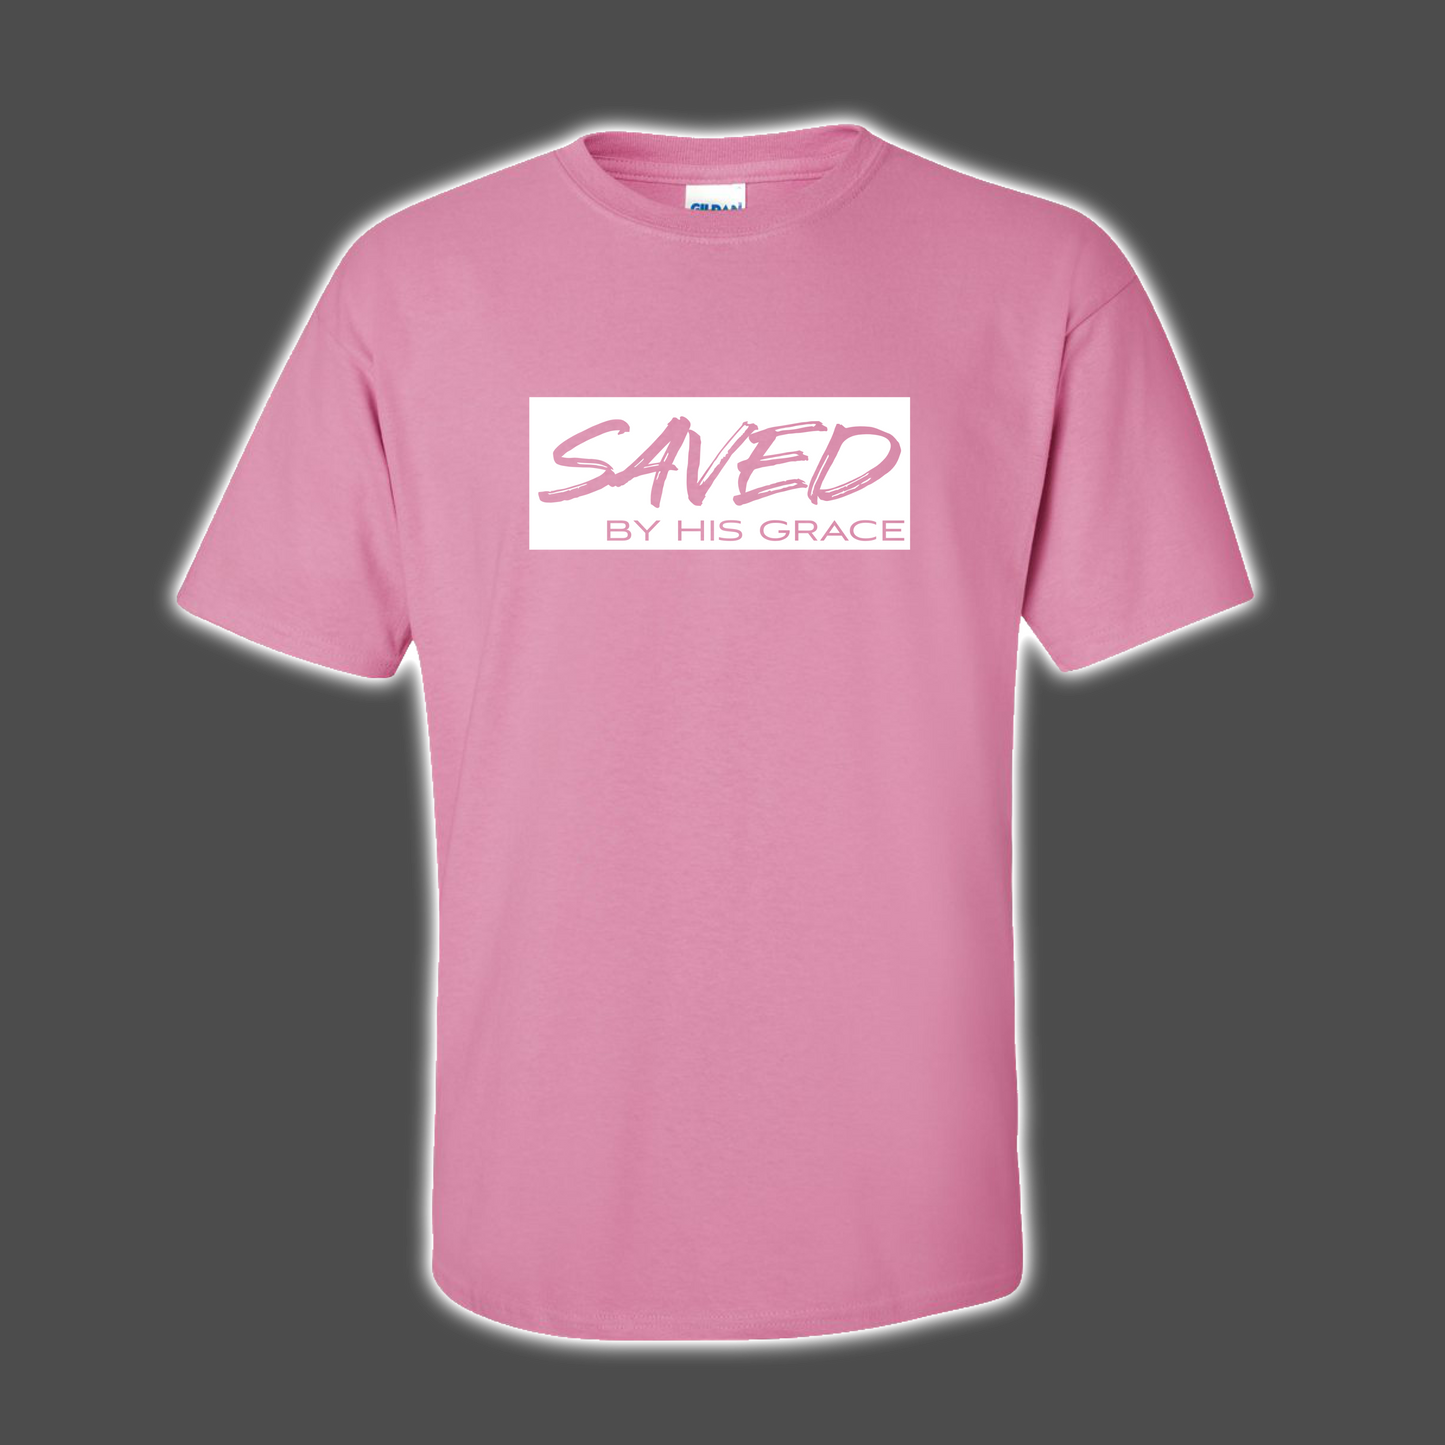 Saved By His Grace T-Shirt